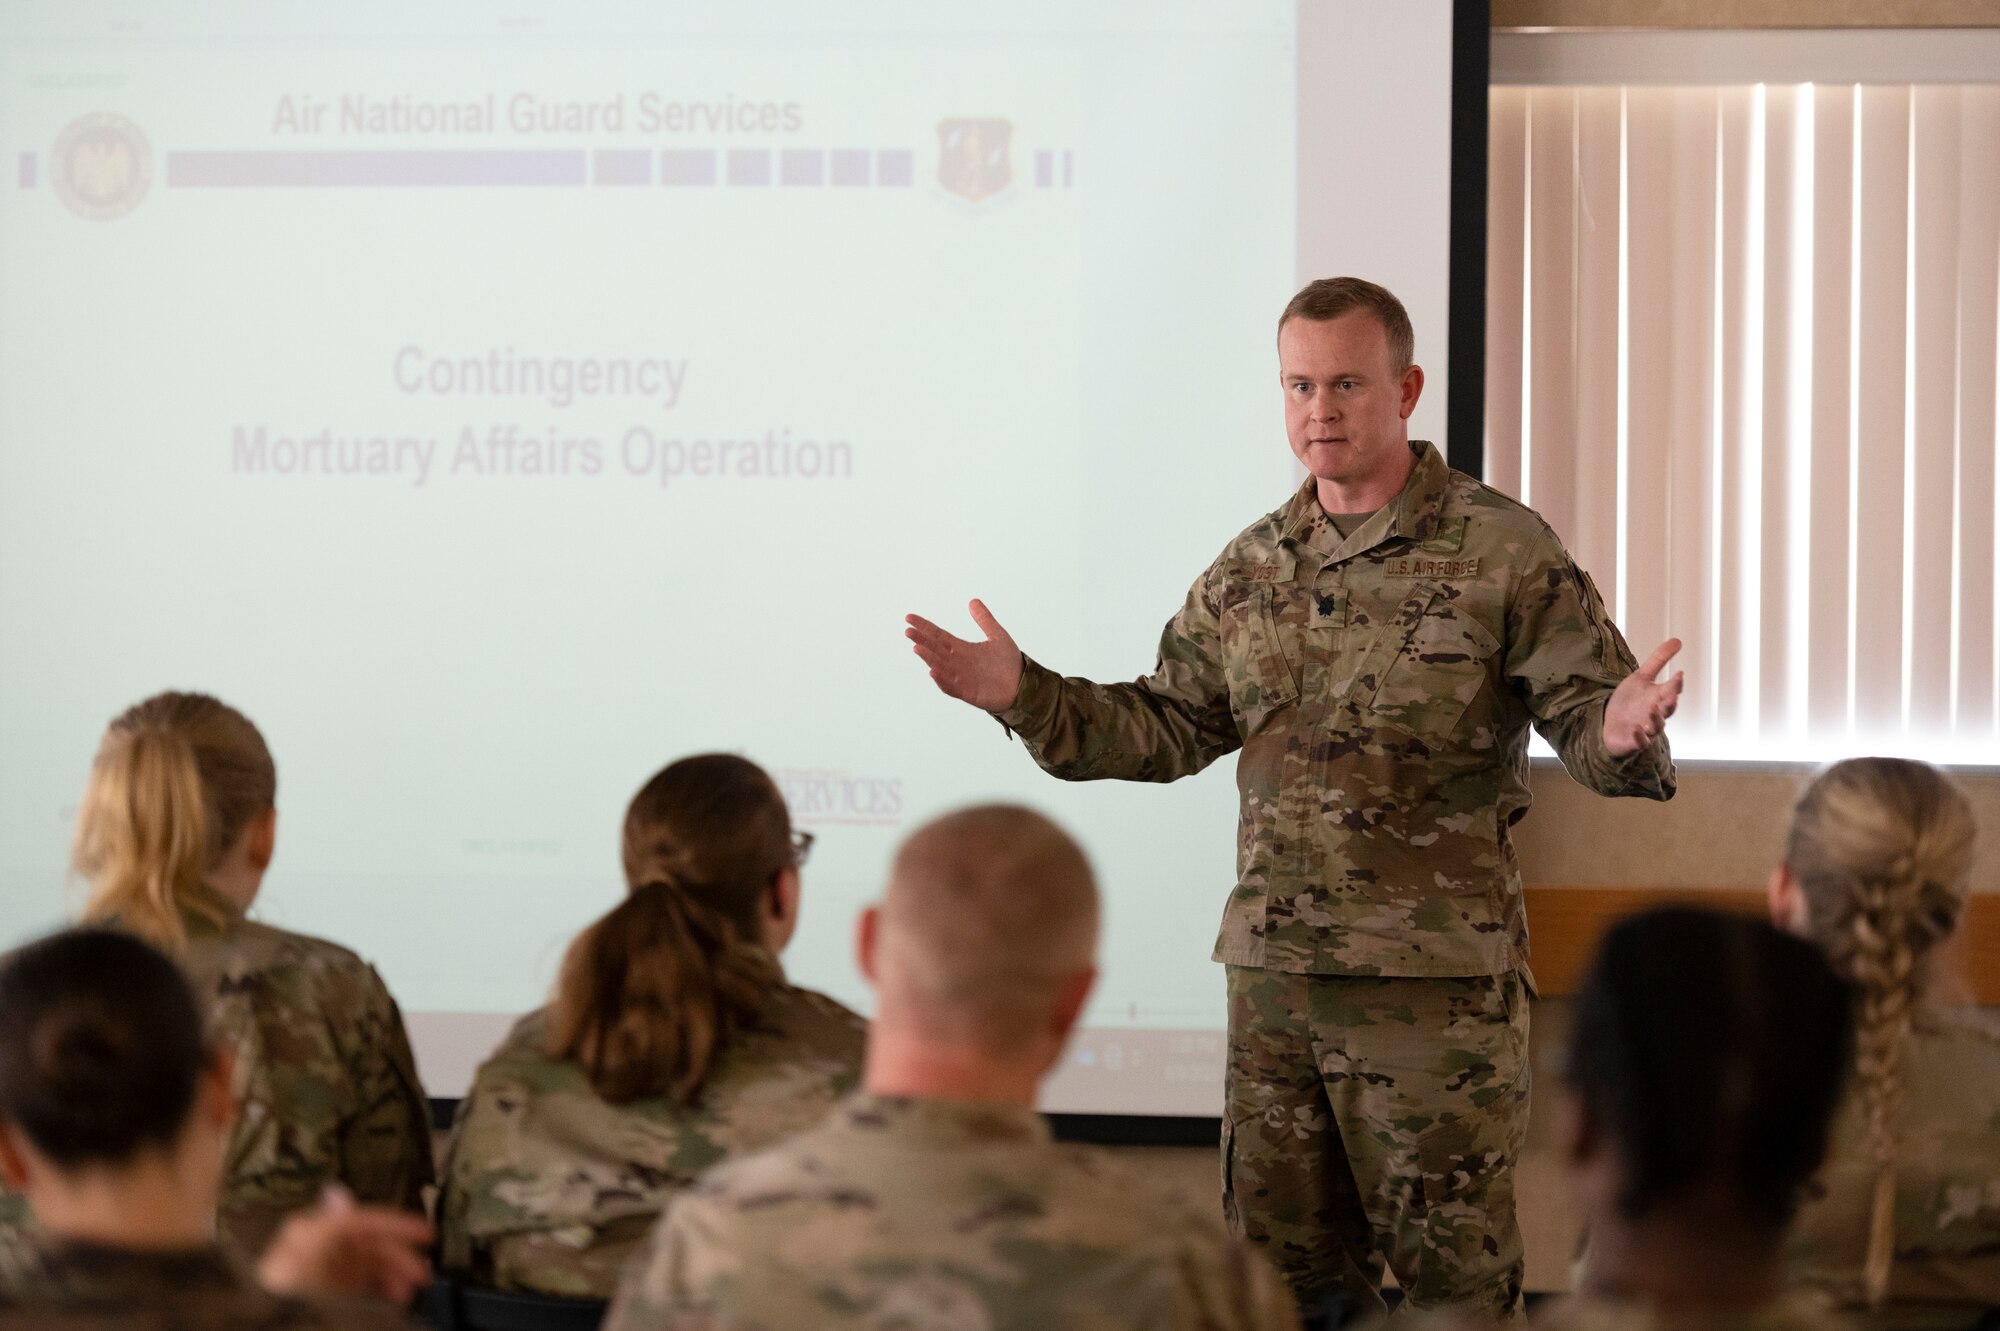 U.S. Air Force Chaplain (Lt. Col.) Nathan Yost, 167th Airlift Wing, talks during a mortuary affairs course as part of a training event at the 167th Airlift Wing, Martinsburg, West Virginia, June 9, 2023.